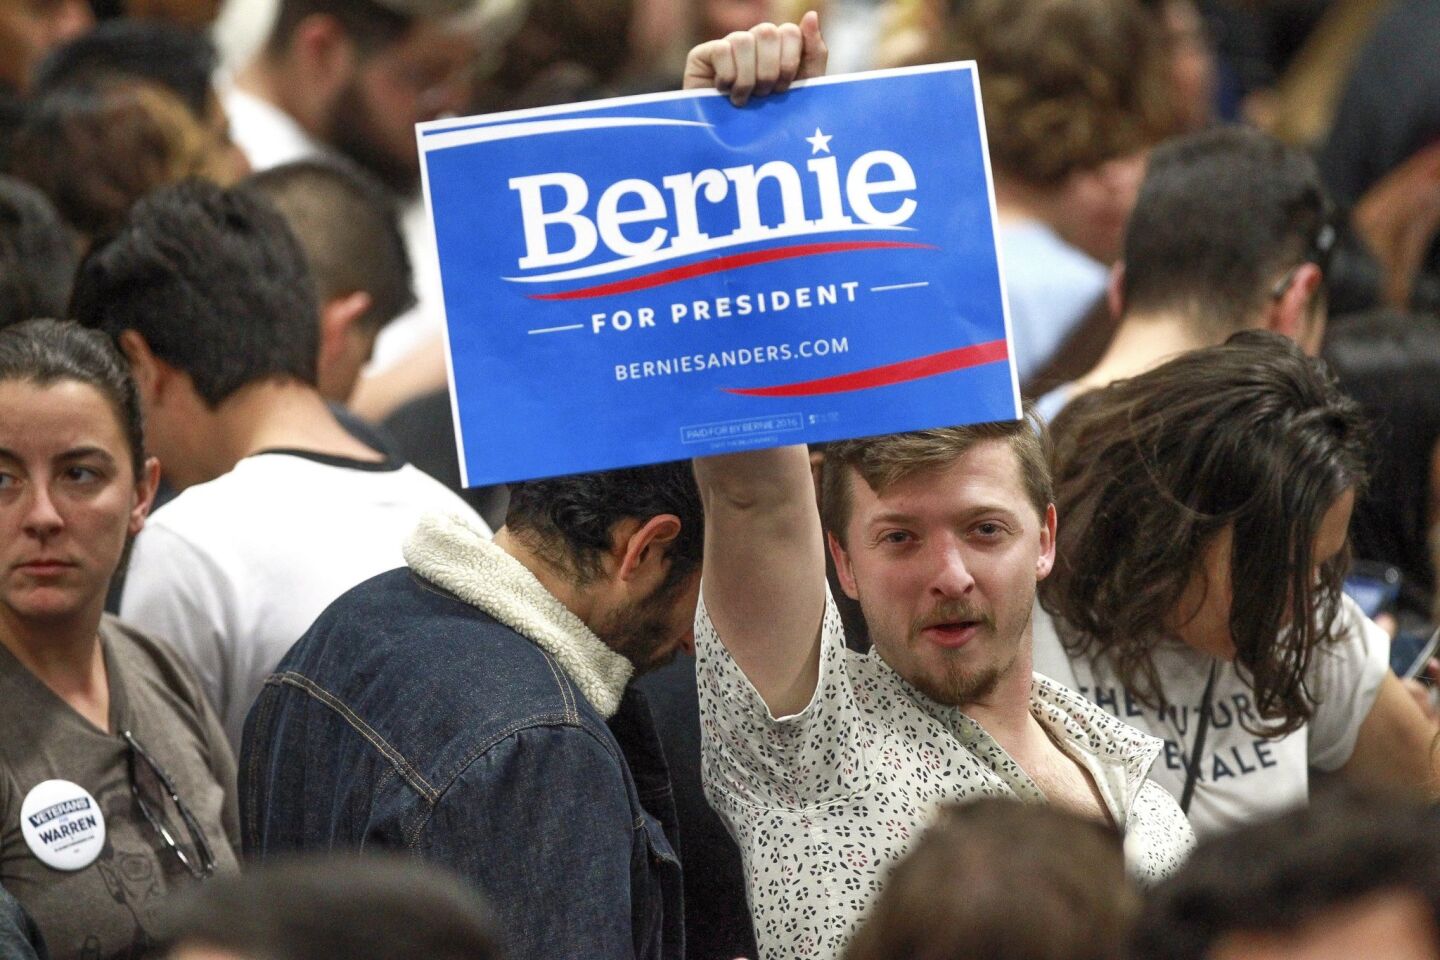 A Bernie Sanders supporter holds a sign as he and other supporters wait for Democratic presidential candidate Bernie Sanders.